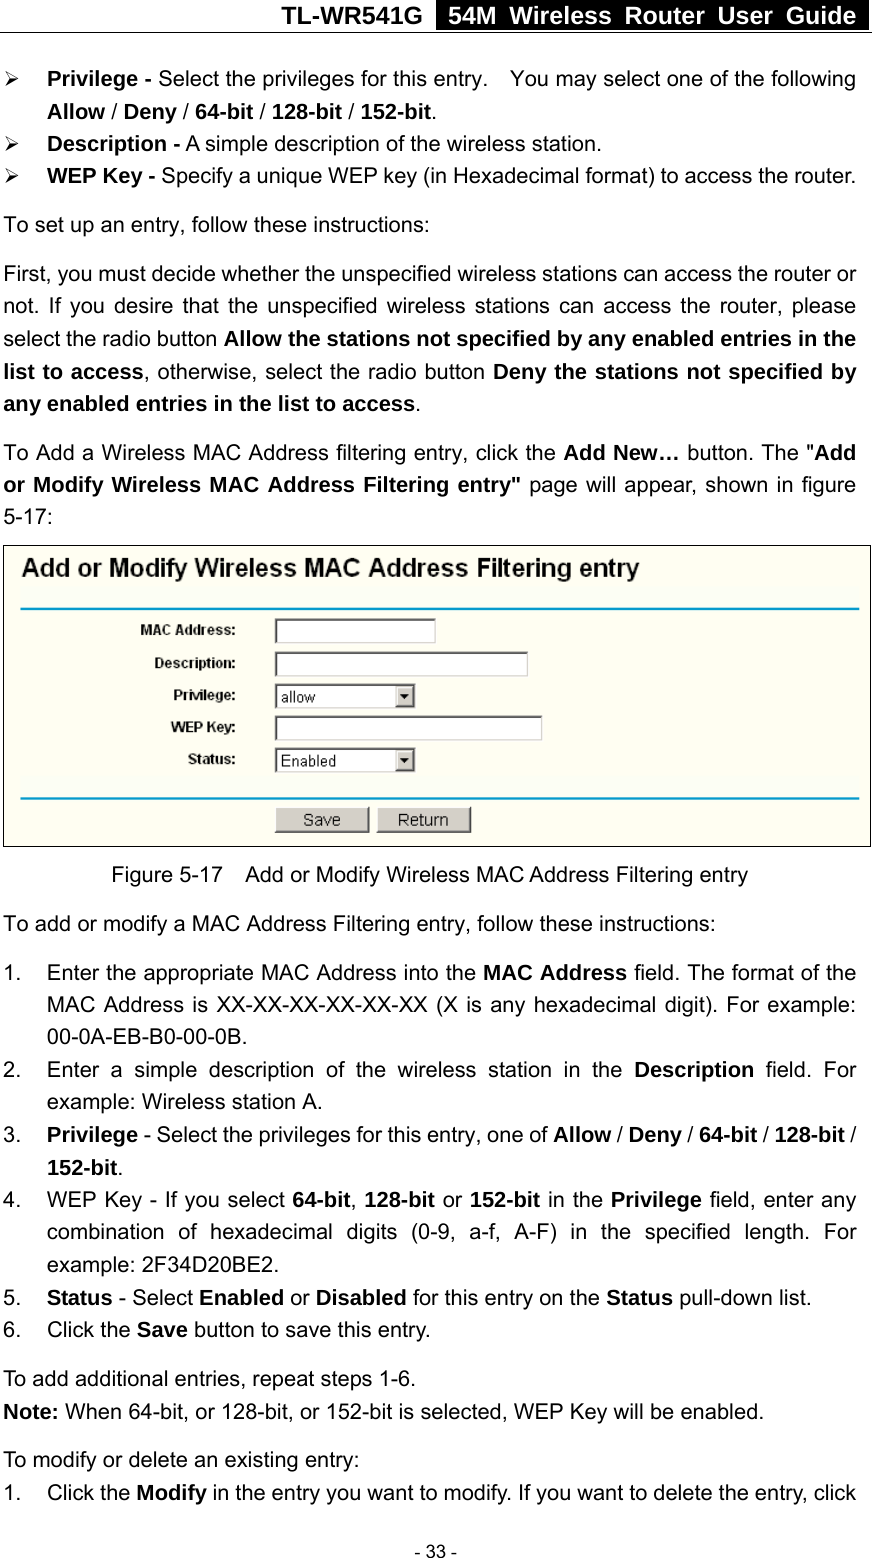 TL-WR541G   54M Wireless Router User Guide  ¾ Privilege - Select the privileges for this entry.    You may select one of the following Allow / Deny / 64-bit / 128-bit / 152-bit.   ¾ Description - A simple description of the wireless station.   ¾ WEP Key - Specify a unique WEP key (in Hexadecimal format) to access the router.   To set up an entry, follow these instructions:   First, you must decide whether the unspecified wireless stations can access the router or not. If you desire that the unspecified wireless stations can access the router, please select the radio button Allow the stations not specified by any enabled entries in the list to access, otherwise, select the radio button Deny the stations not specified by any enabled entries in the list to access. To Add a Wireless MAC Address filtering entry, click the Add New… button. The &quot;Add or Modify Wireless MAC Address Filtering entry&quot; page will appear, shown in figure 5-17:  Figure 5-17    Add or Modify Wireless MAC Address Filtering entry To add or modify a MAC Address Filtering entry, follow these instructions: 1.  Enter the appropriate MAC Address into the MAC Address field. The format of the MAC Address is XX-XX-XX-XX-XX-XX (X is any hexadecimal digit). For example: 00-0A-EB-B0-00-0B.  2.  Enter a simple description of the wireless station in the Description field. For example: Wireless station A. 3.  Privilege - Select the privileges for this entry, one of Allow / Deny / 64-bit / 128-bit / 152-bit.  4.  WEP Key - If you select 64-bit, 128-bit or 152-bit in the Privilege field, enter any combination of hexadecimal digits (0-9, a-f, A-F) in the specified length. For example: 2F34D20BE2.   5.  Status - Select Enabled or Disabled for this entry on the Status pull-down list. 6. Click the Save button to save this entry. To add additional entries, repeat steps 1-6. Note: When 64-bit, or 128-bit, or 152-bit is selected, WEP Key will be enabled.   To modify or delete an existing entry: 1. Click the Modify in the entry you want to modify. If you want to delete the entry, click  - 33 - 